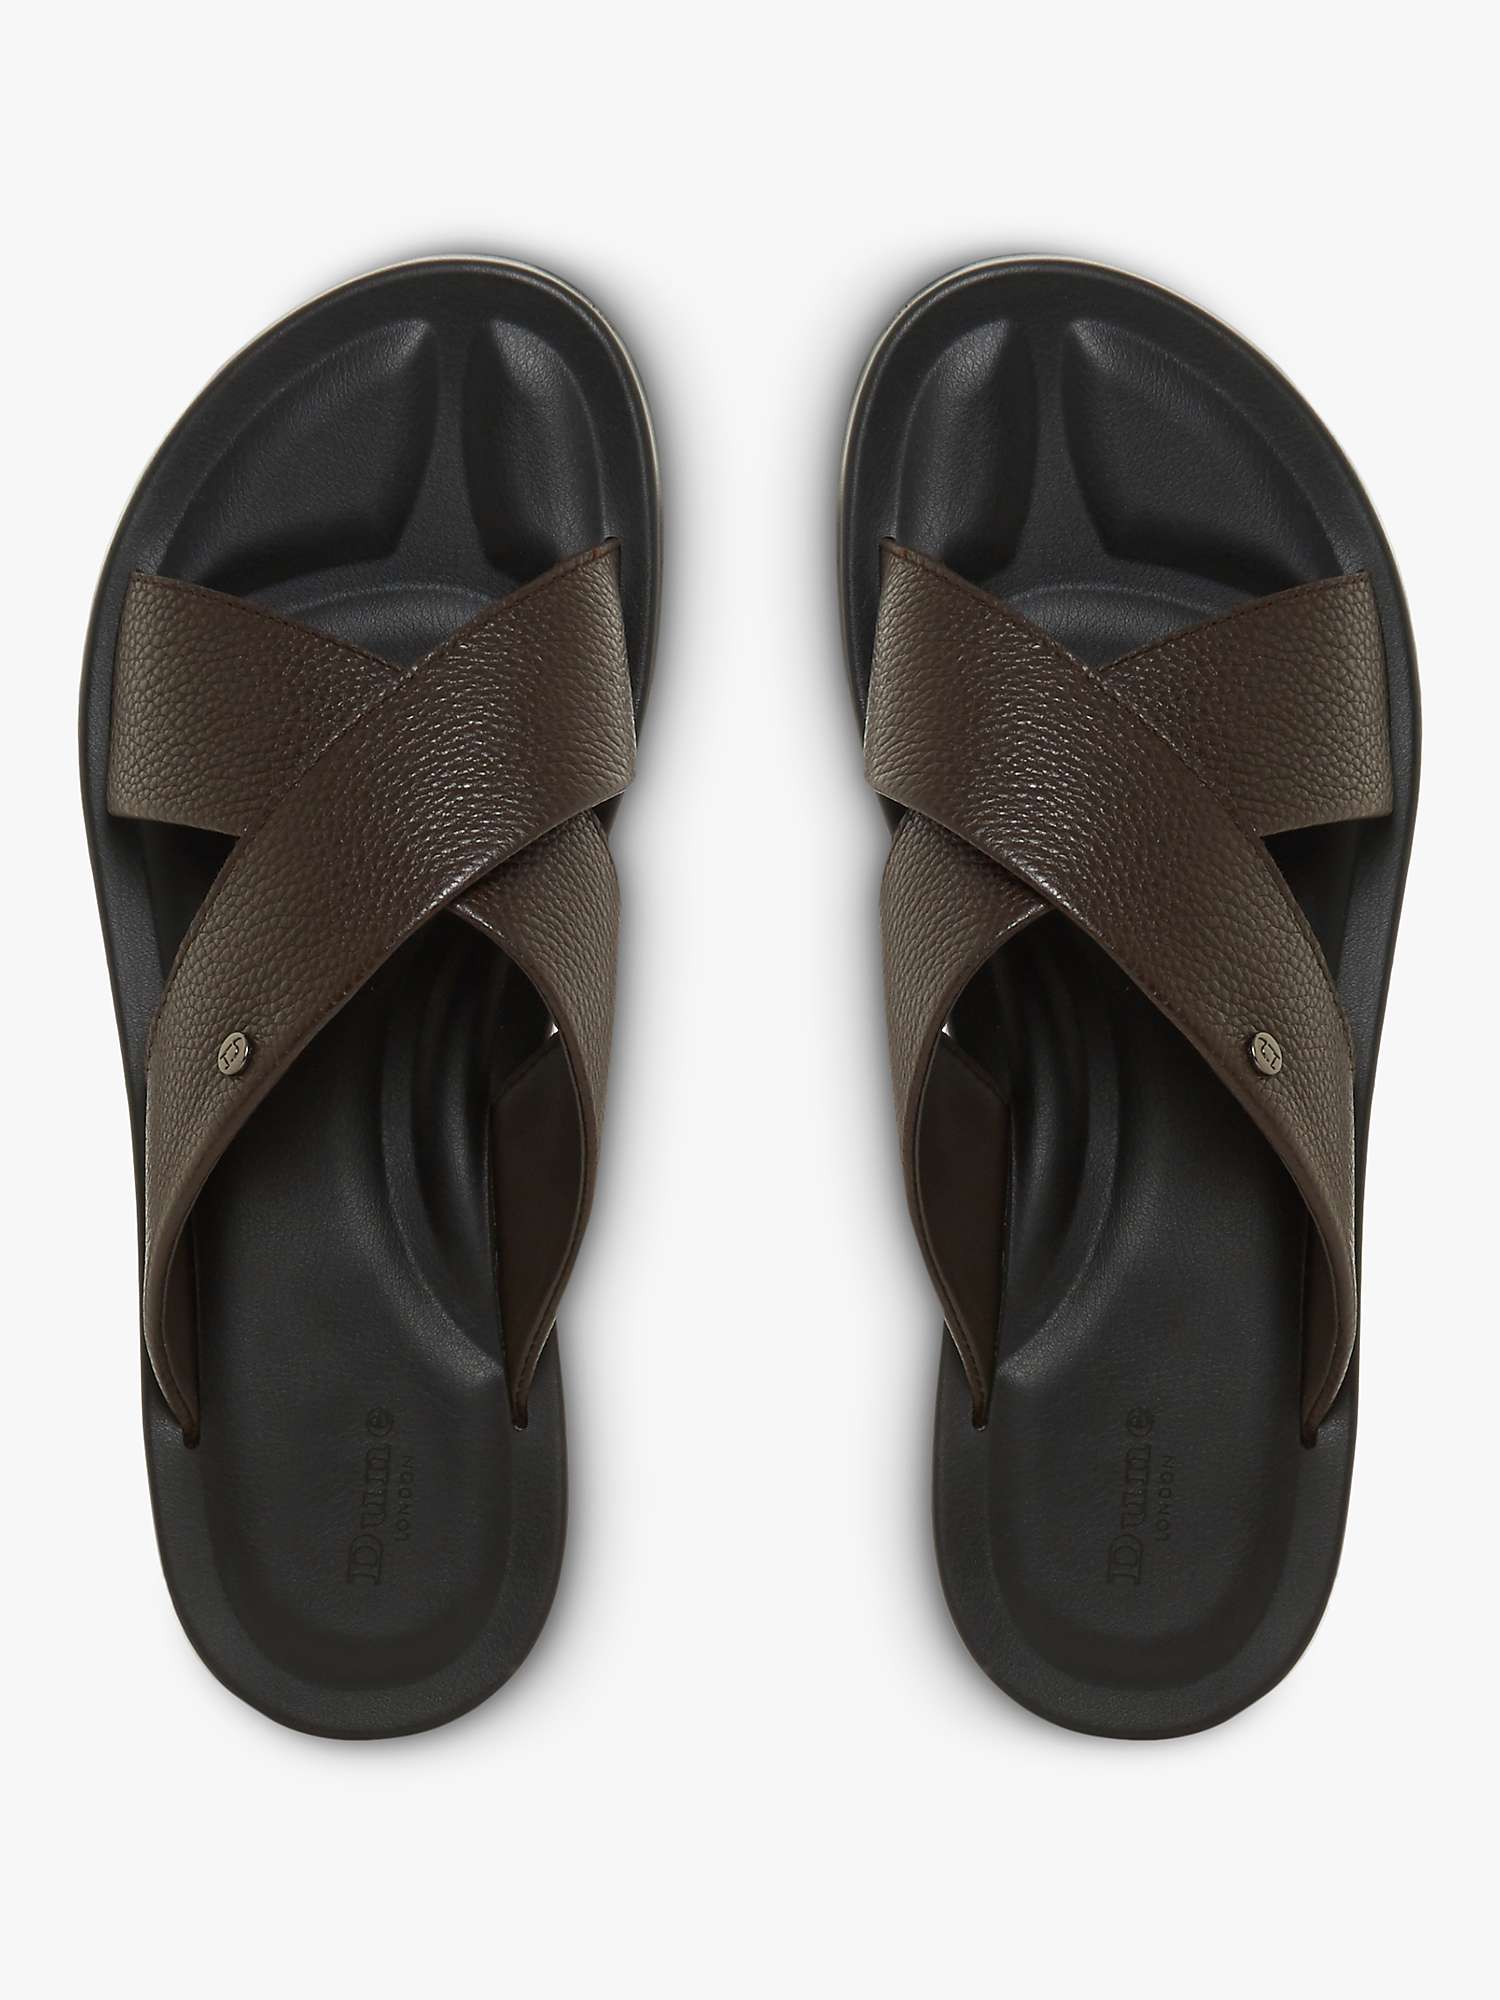 Buy Dune Frankss Leather Sandals, Brown Online at johnlewis.com